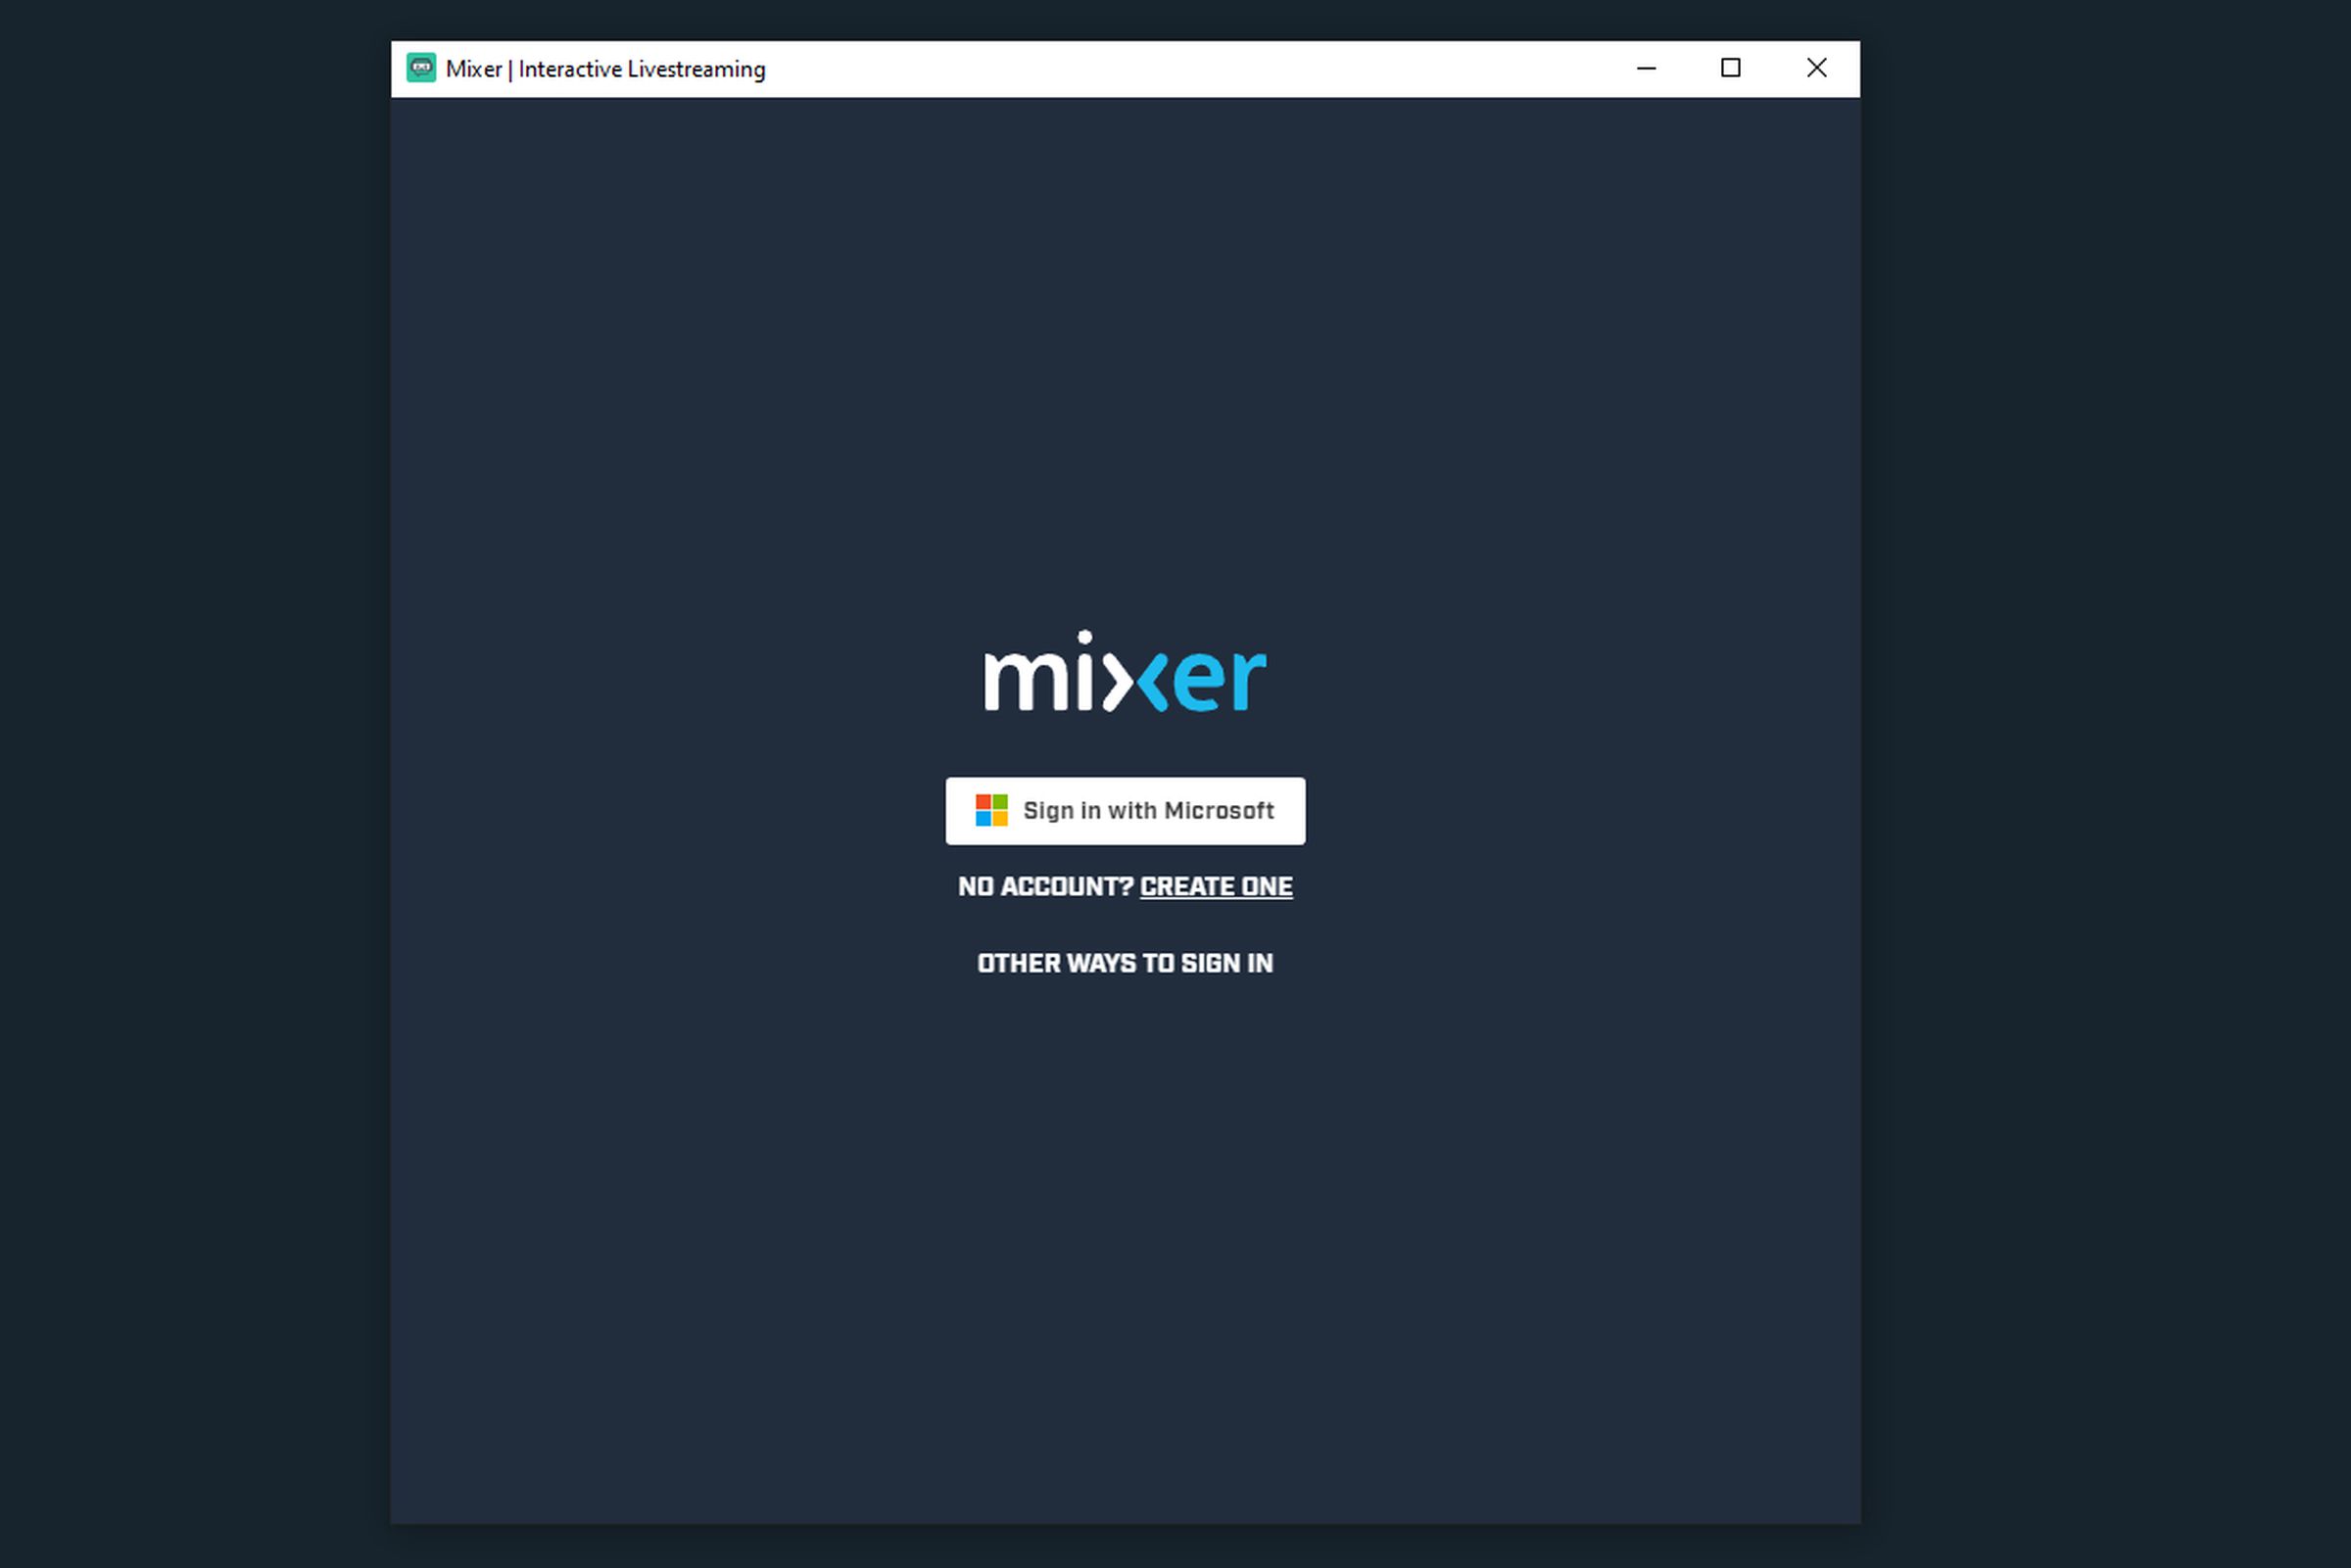 Sign in with Mixer directly through Streamlabs OBS